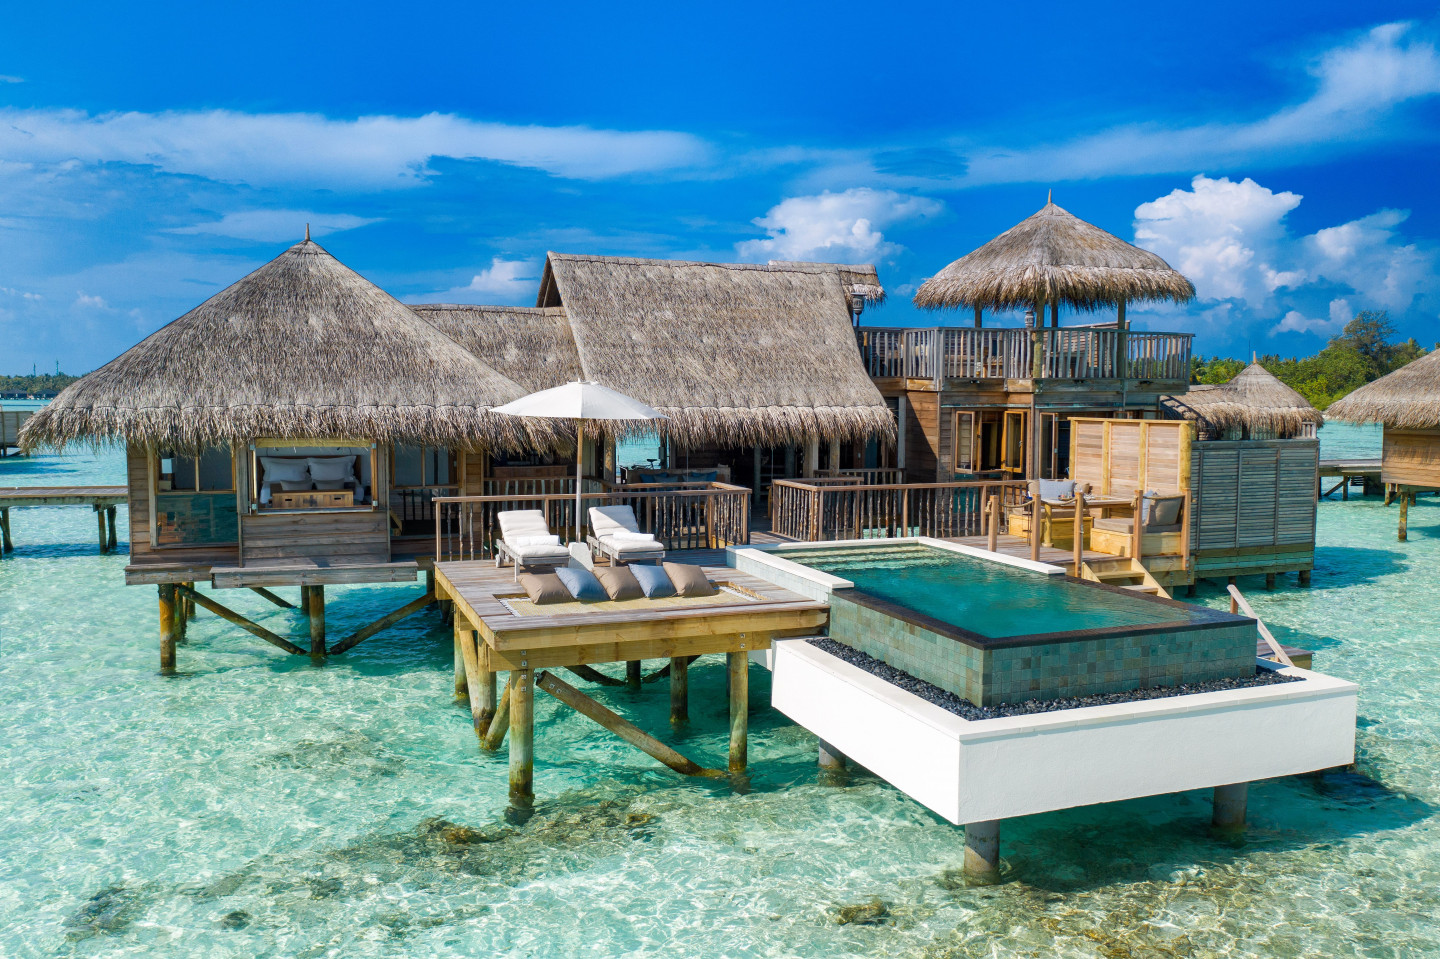 Located on the private island of Lankanfushi, Gili is a magical all-water villa resort crafted from natural materials and inspired by tractional design.